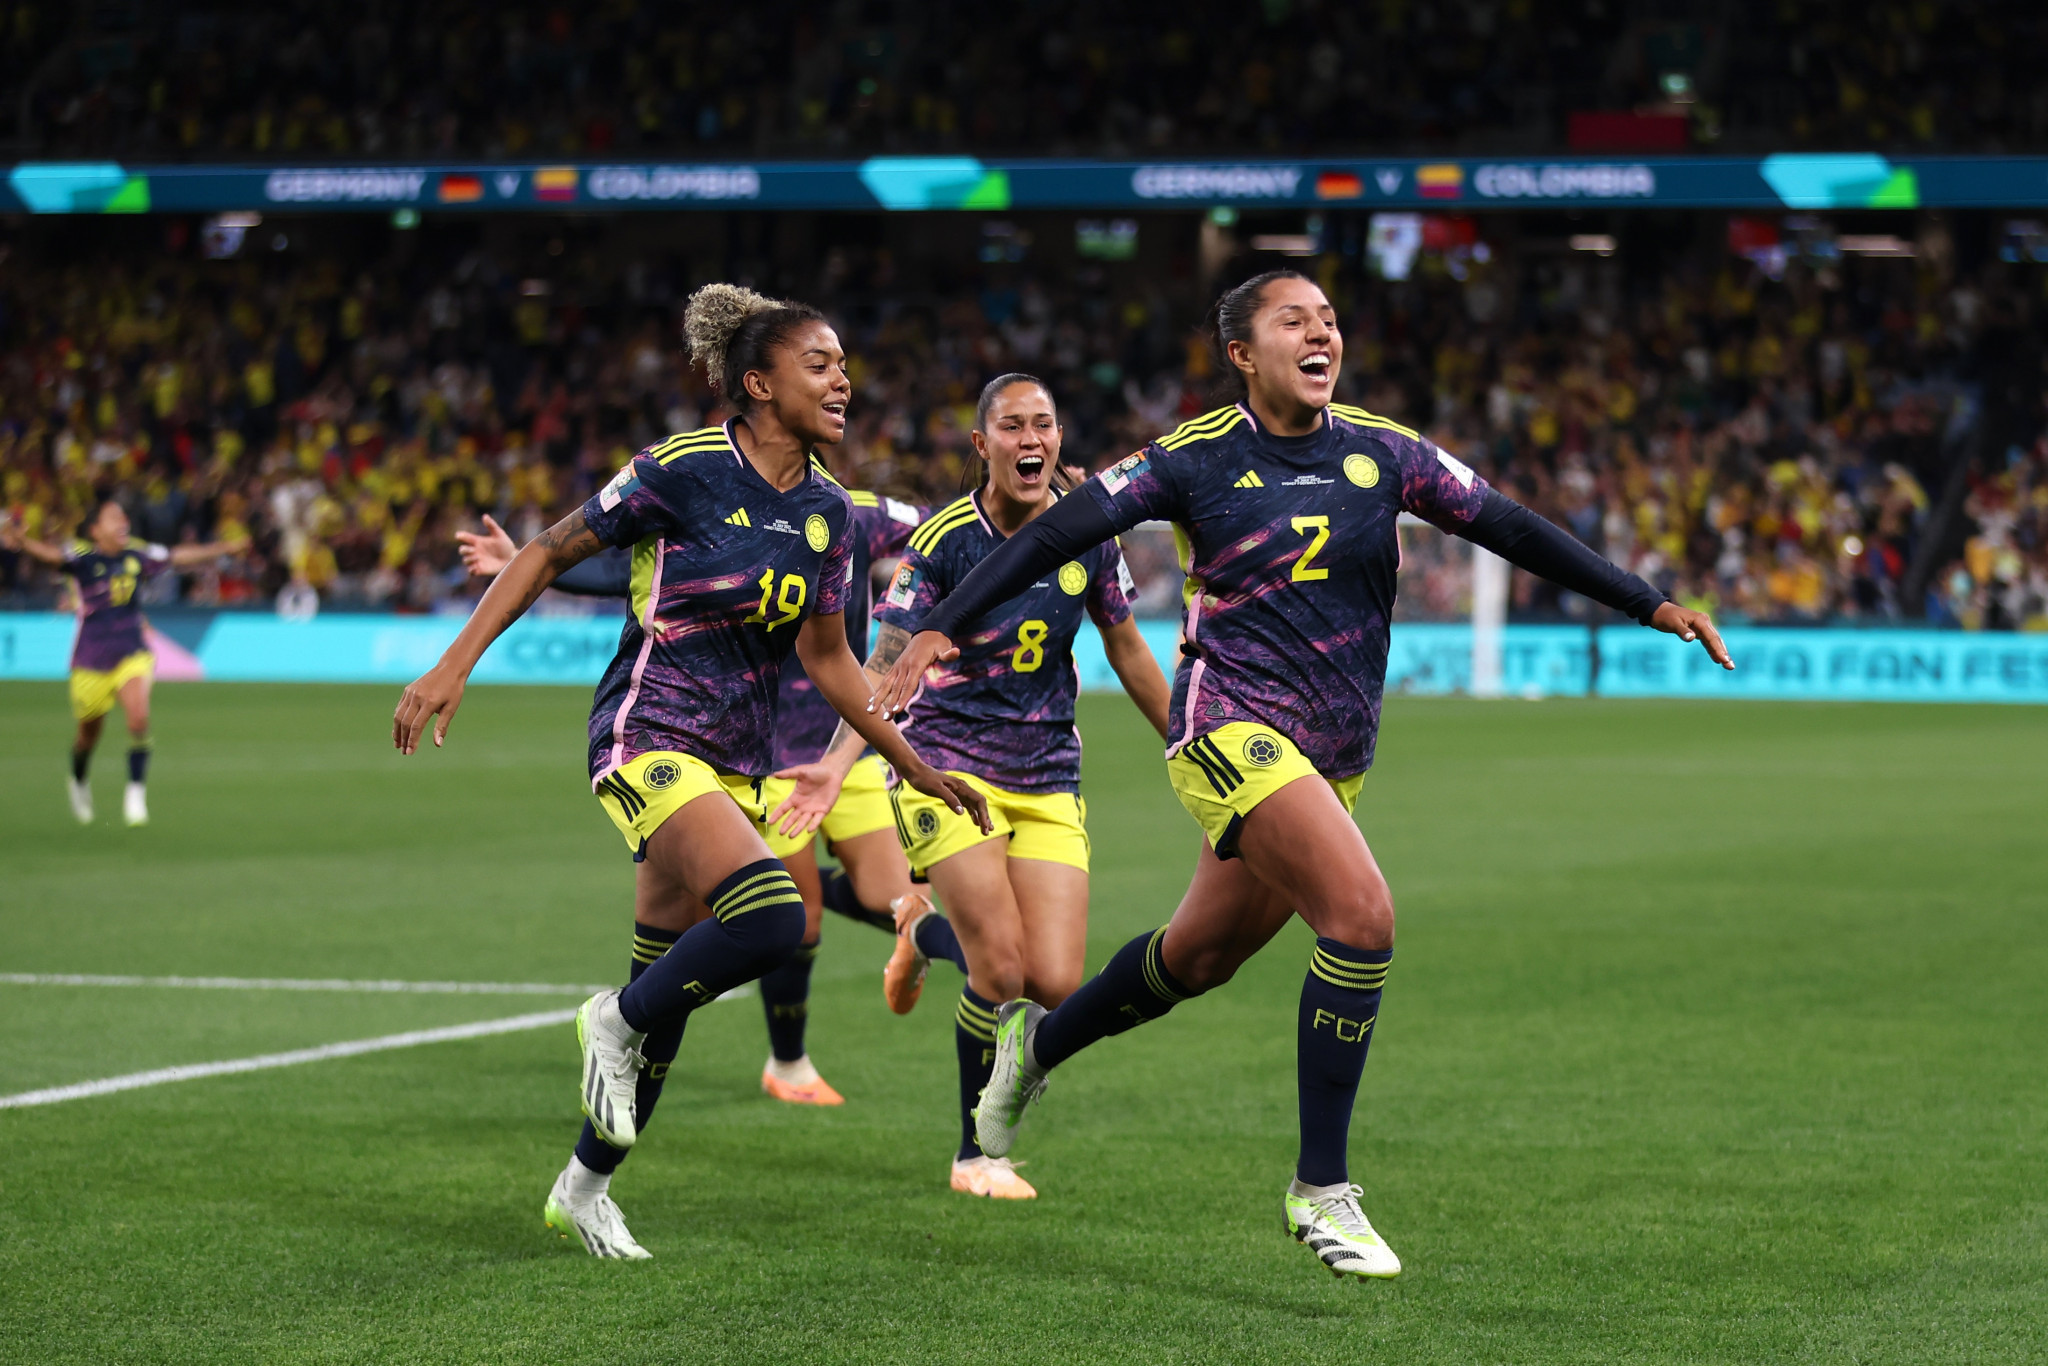 Vanegas nets late winner as Colombia upset Germany at FIFA Women’s World Cup